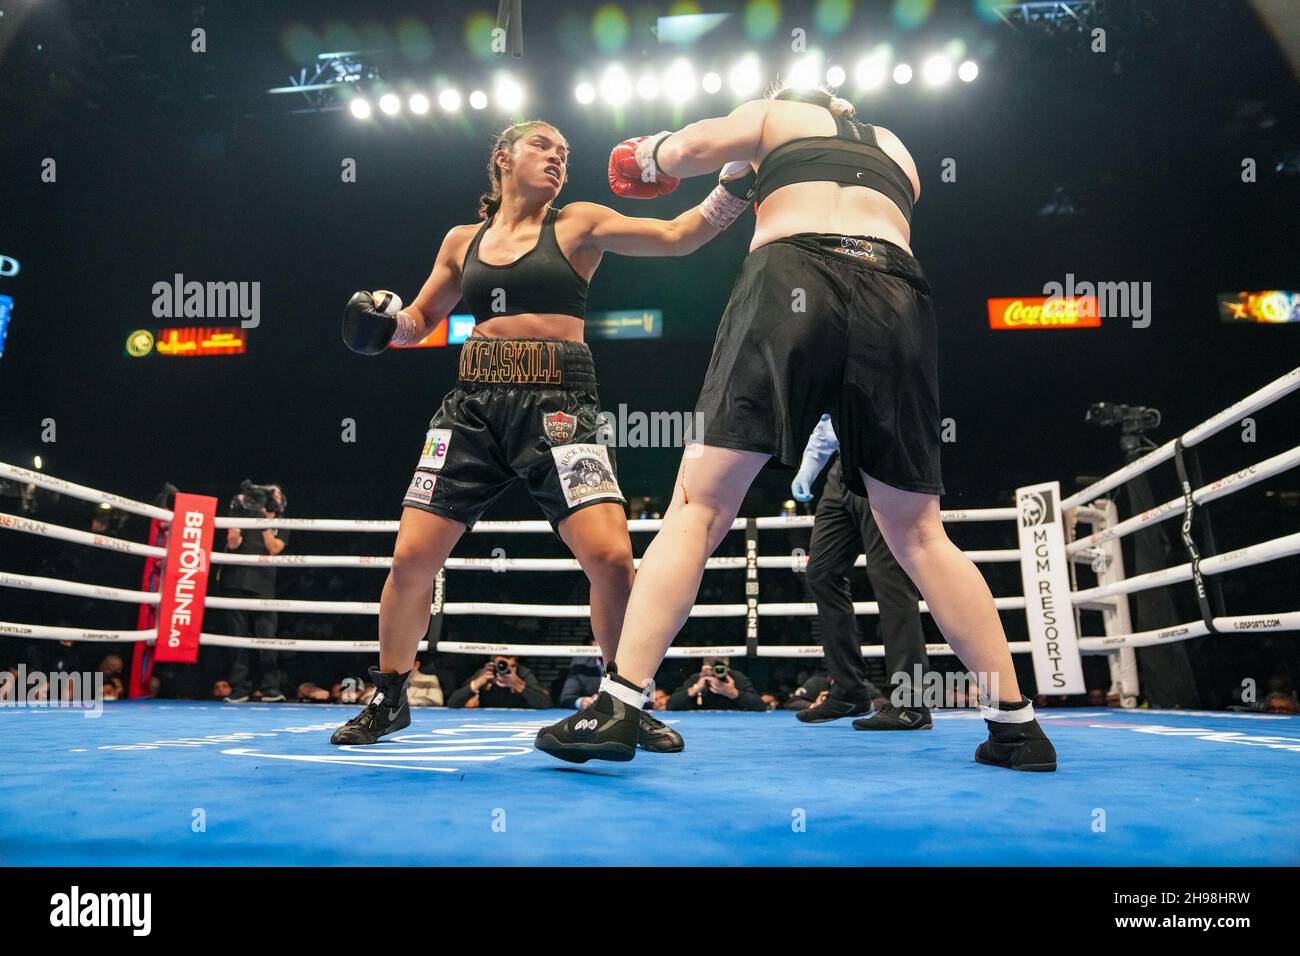 December 4, 2021, Las Vegas, LAS VEGAS, NV, United States: LAS VEGAS, NV - DECEMBER 4: (L-R) Jessica McCaskill punches Kandi Wyatt during their welterweight title bout at the MGM Grand Garden Arena on December 4, 2021 in Las Vegas, United States. (Credit Image: © Louis Grasse/PX Imagens via ZUMA Press Wire) Stock Photo